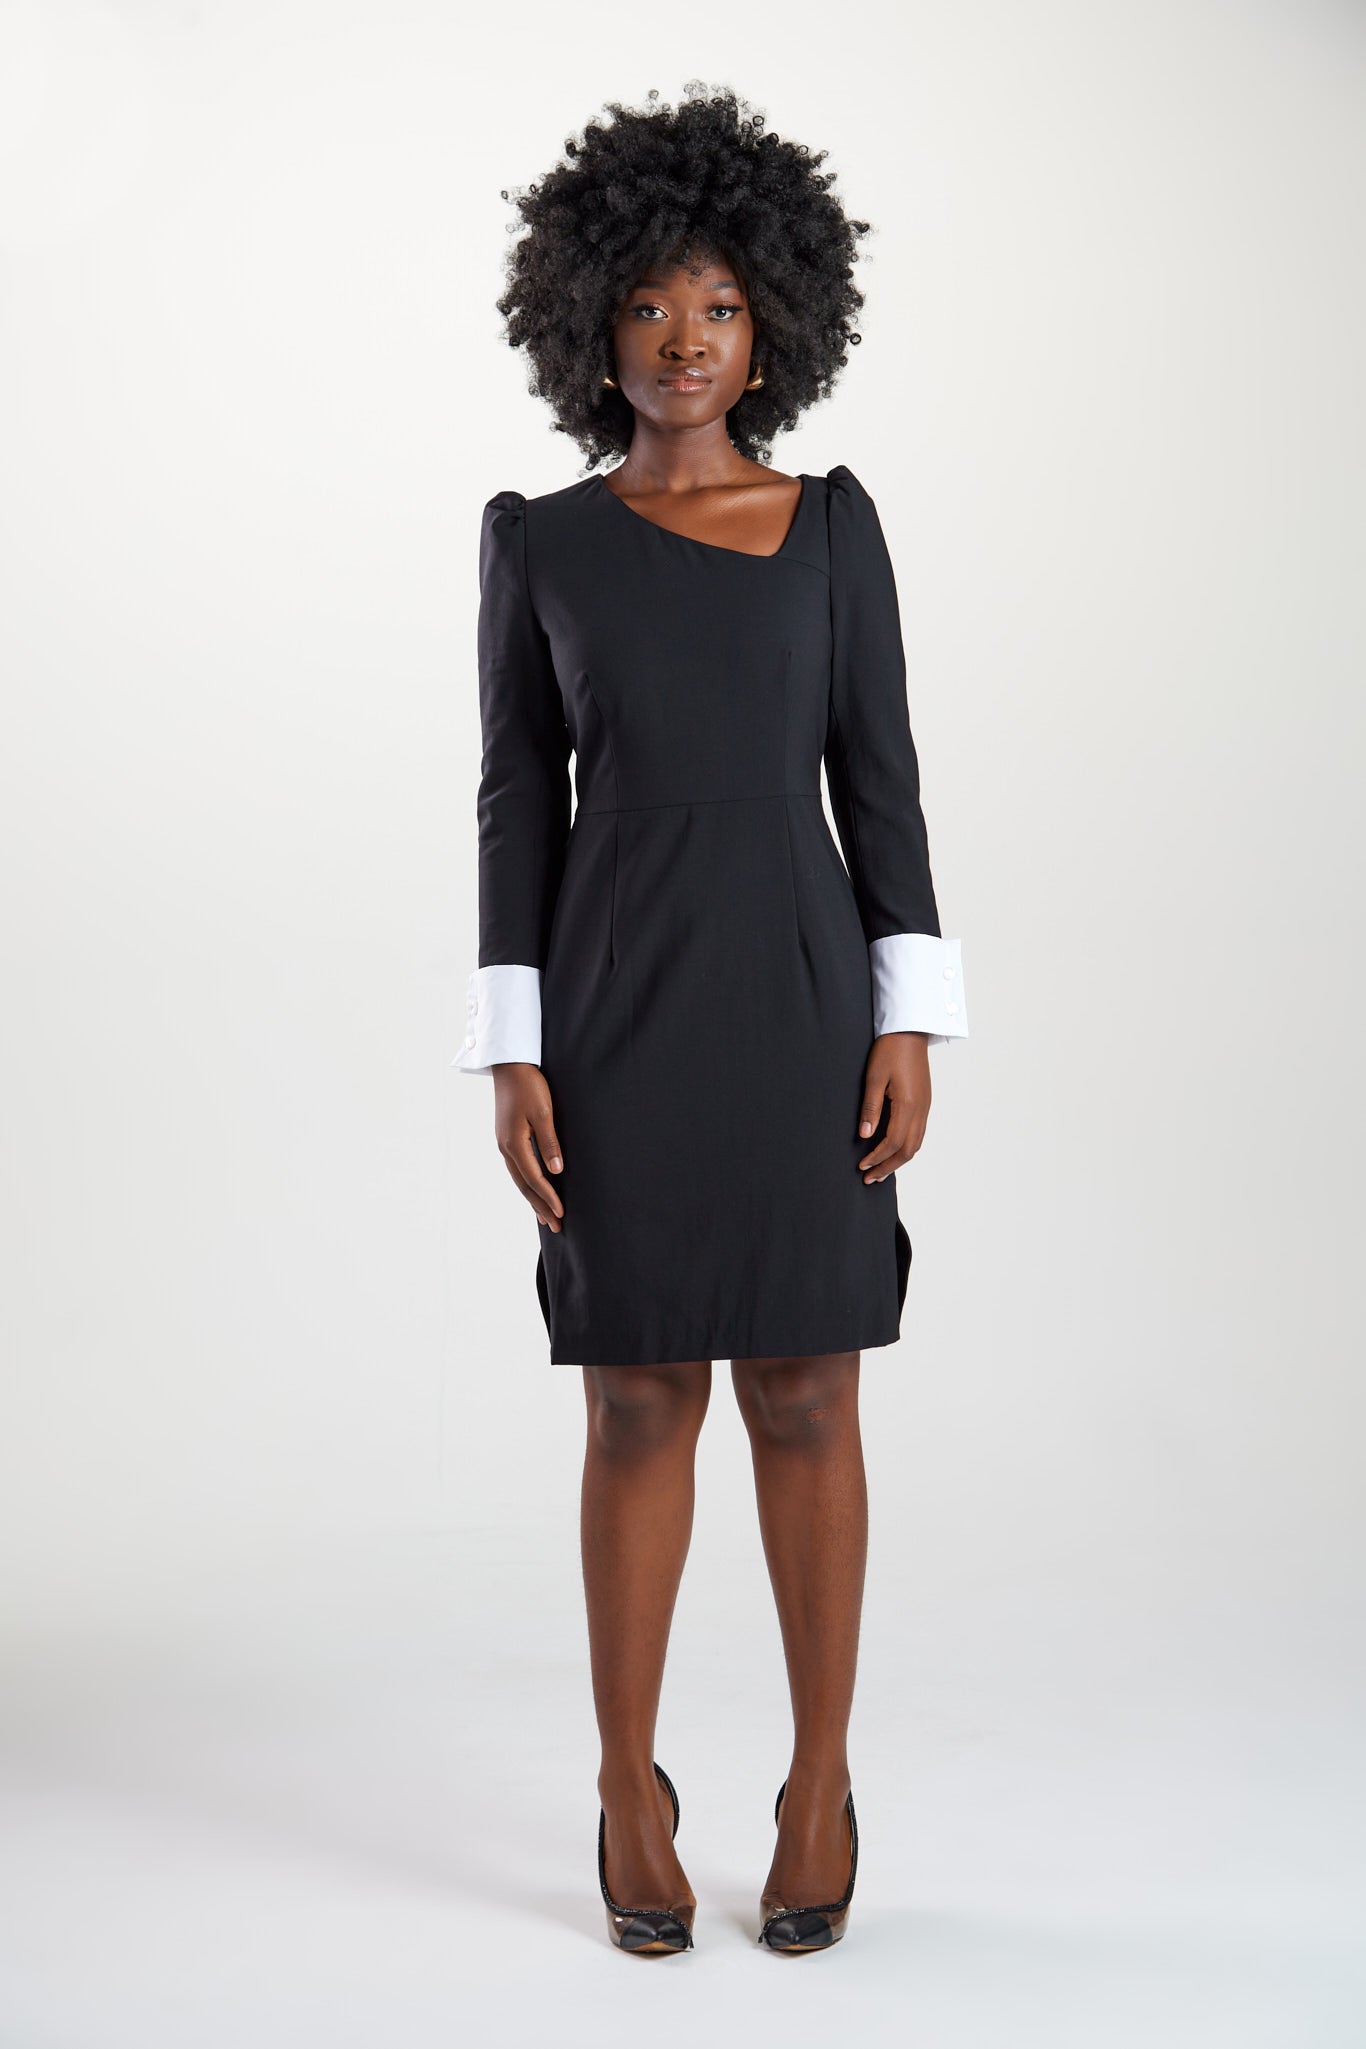 Perfect modern women's dress in Italian extra fine merino wool with asymmetric neckline, puff shoulders, and definitive cuff sleeve details